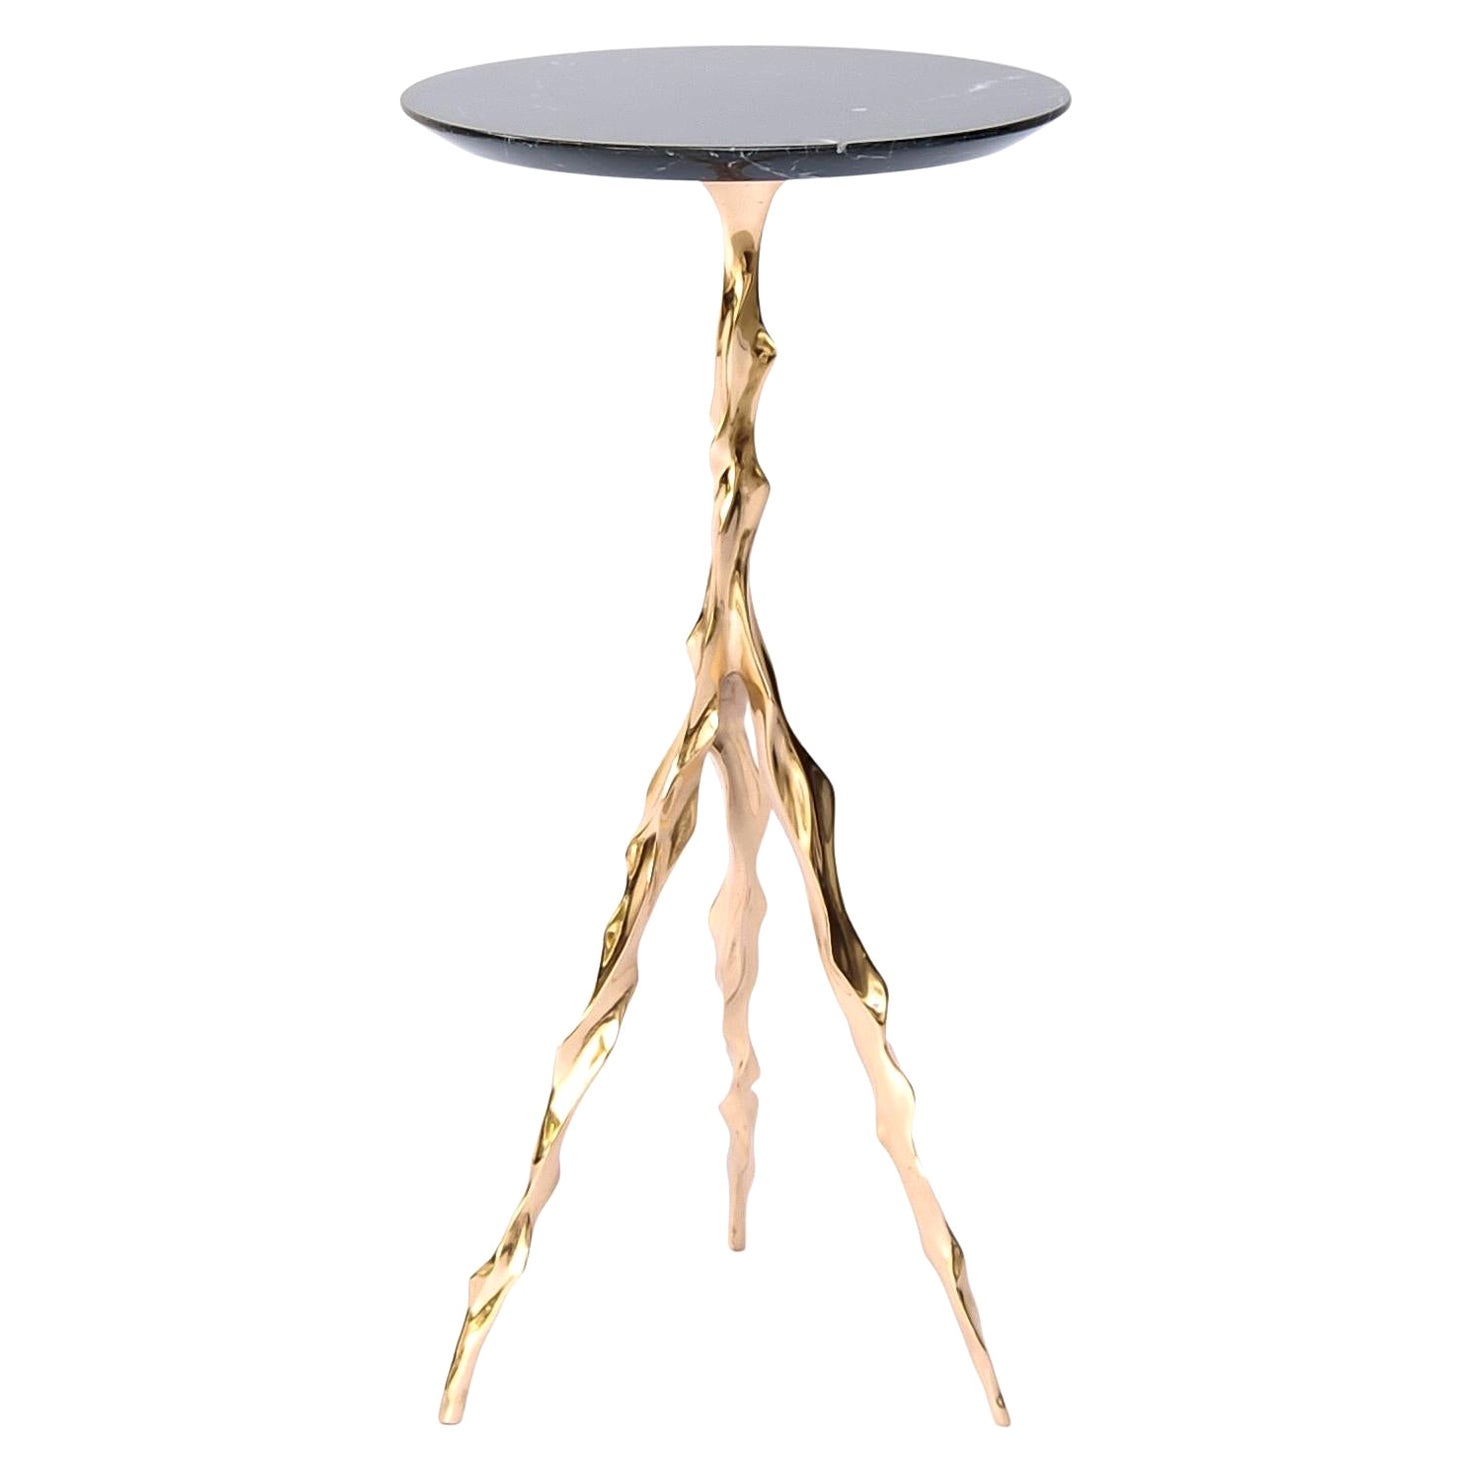 Etta Drink Table with Nero Marquina Marble Top by Fakasaka Design For Sale